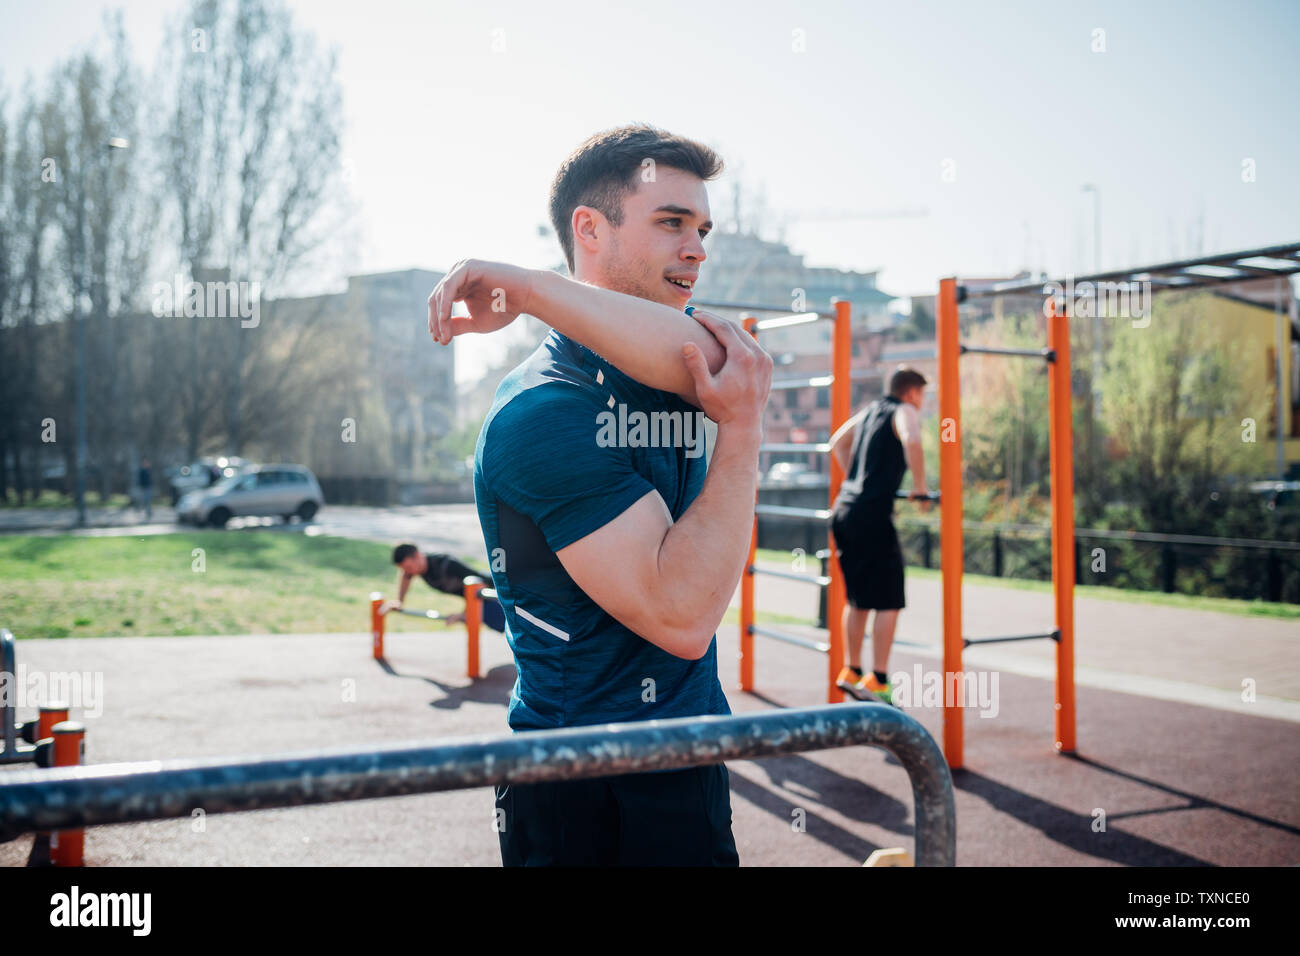 Calisthenics at outdoor gym, young man stretching arm Stock Photo